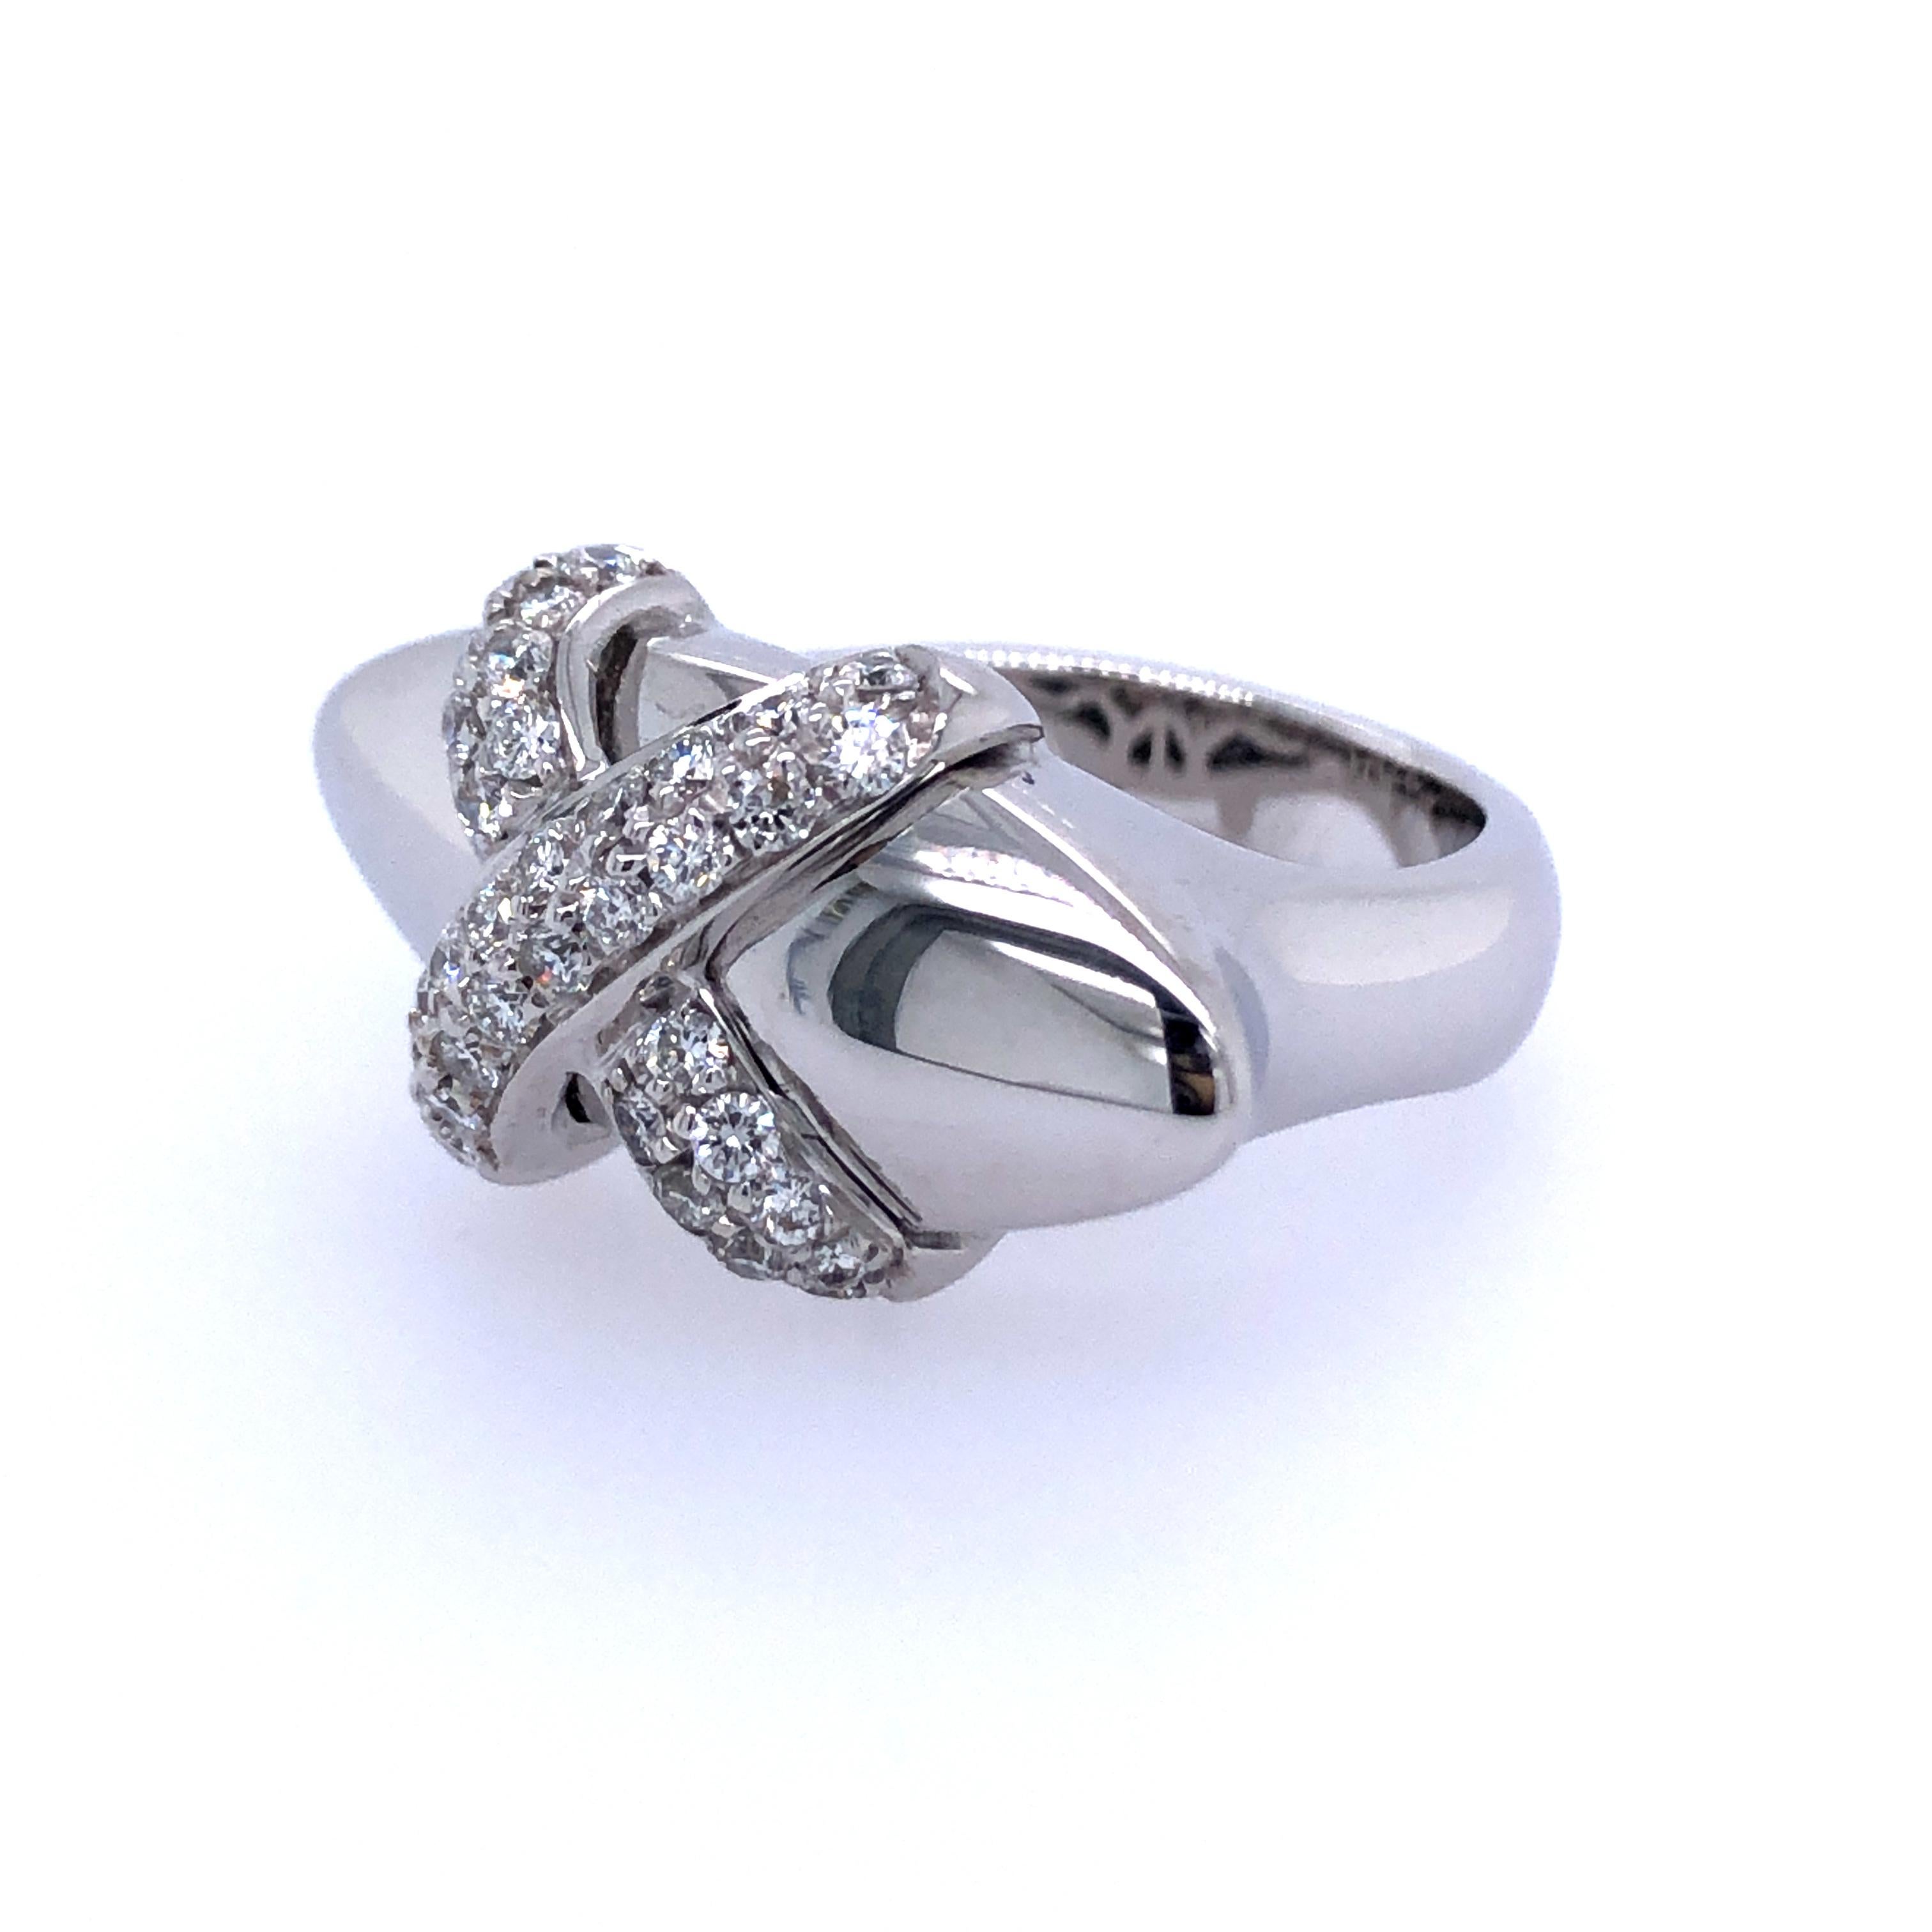 Pavé-set with an X of round brilliant-cut diamonds
18k white gold Ring size 6; Gross weight 16.1 g 10.3 dwts 